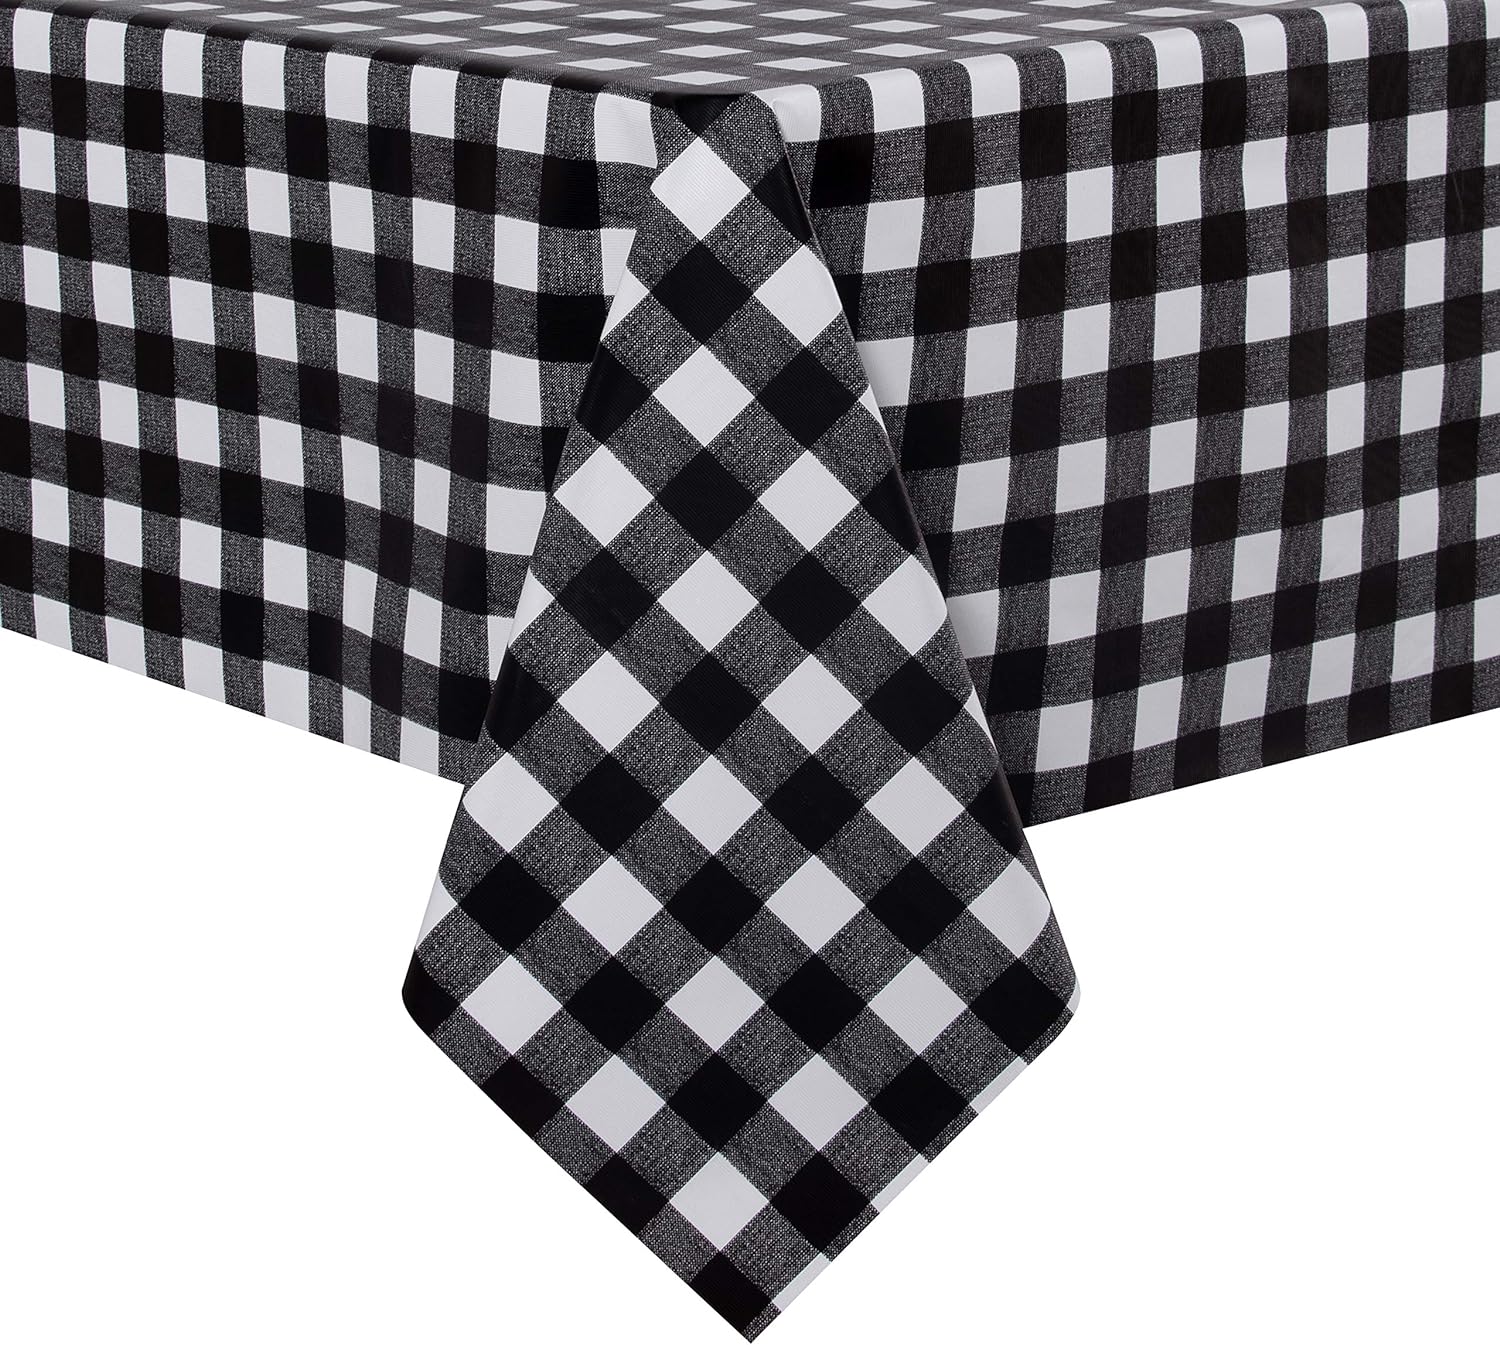 sancua Checkered Vinyl Rectangle Tablecloth - 54 x 78 Inch - 100% Waterproof Oil Proof Spill Proof PVC Table Cloth, Wipe Clean Table Cover for Dining Table Buffet Parties, Black and White